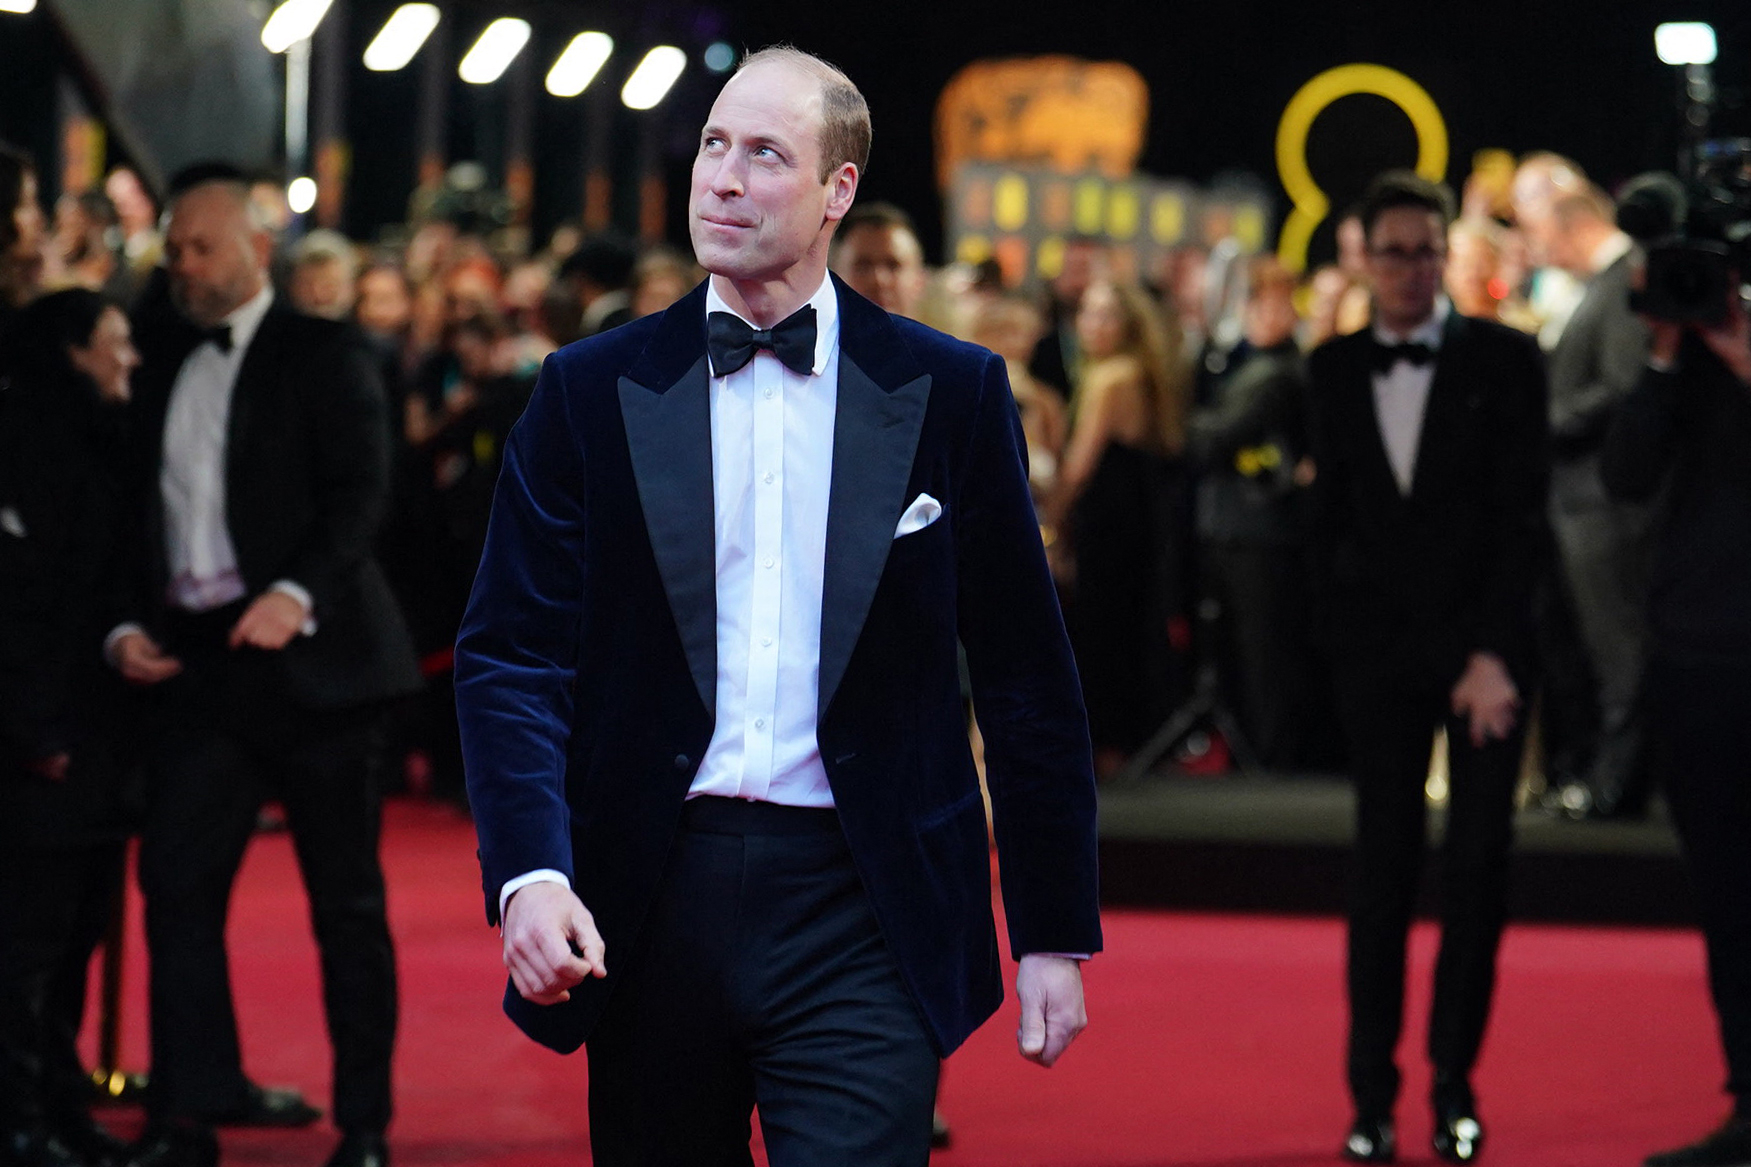 Prince William in a black tuxedo with a bow tie walks on a red carpet